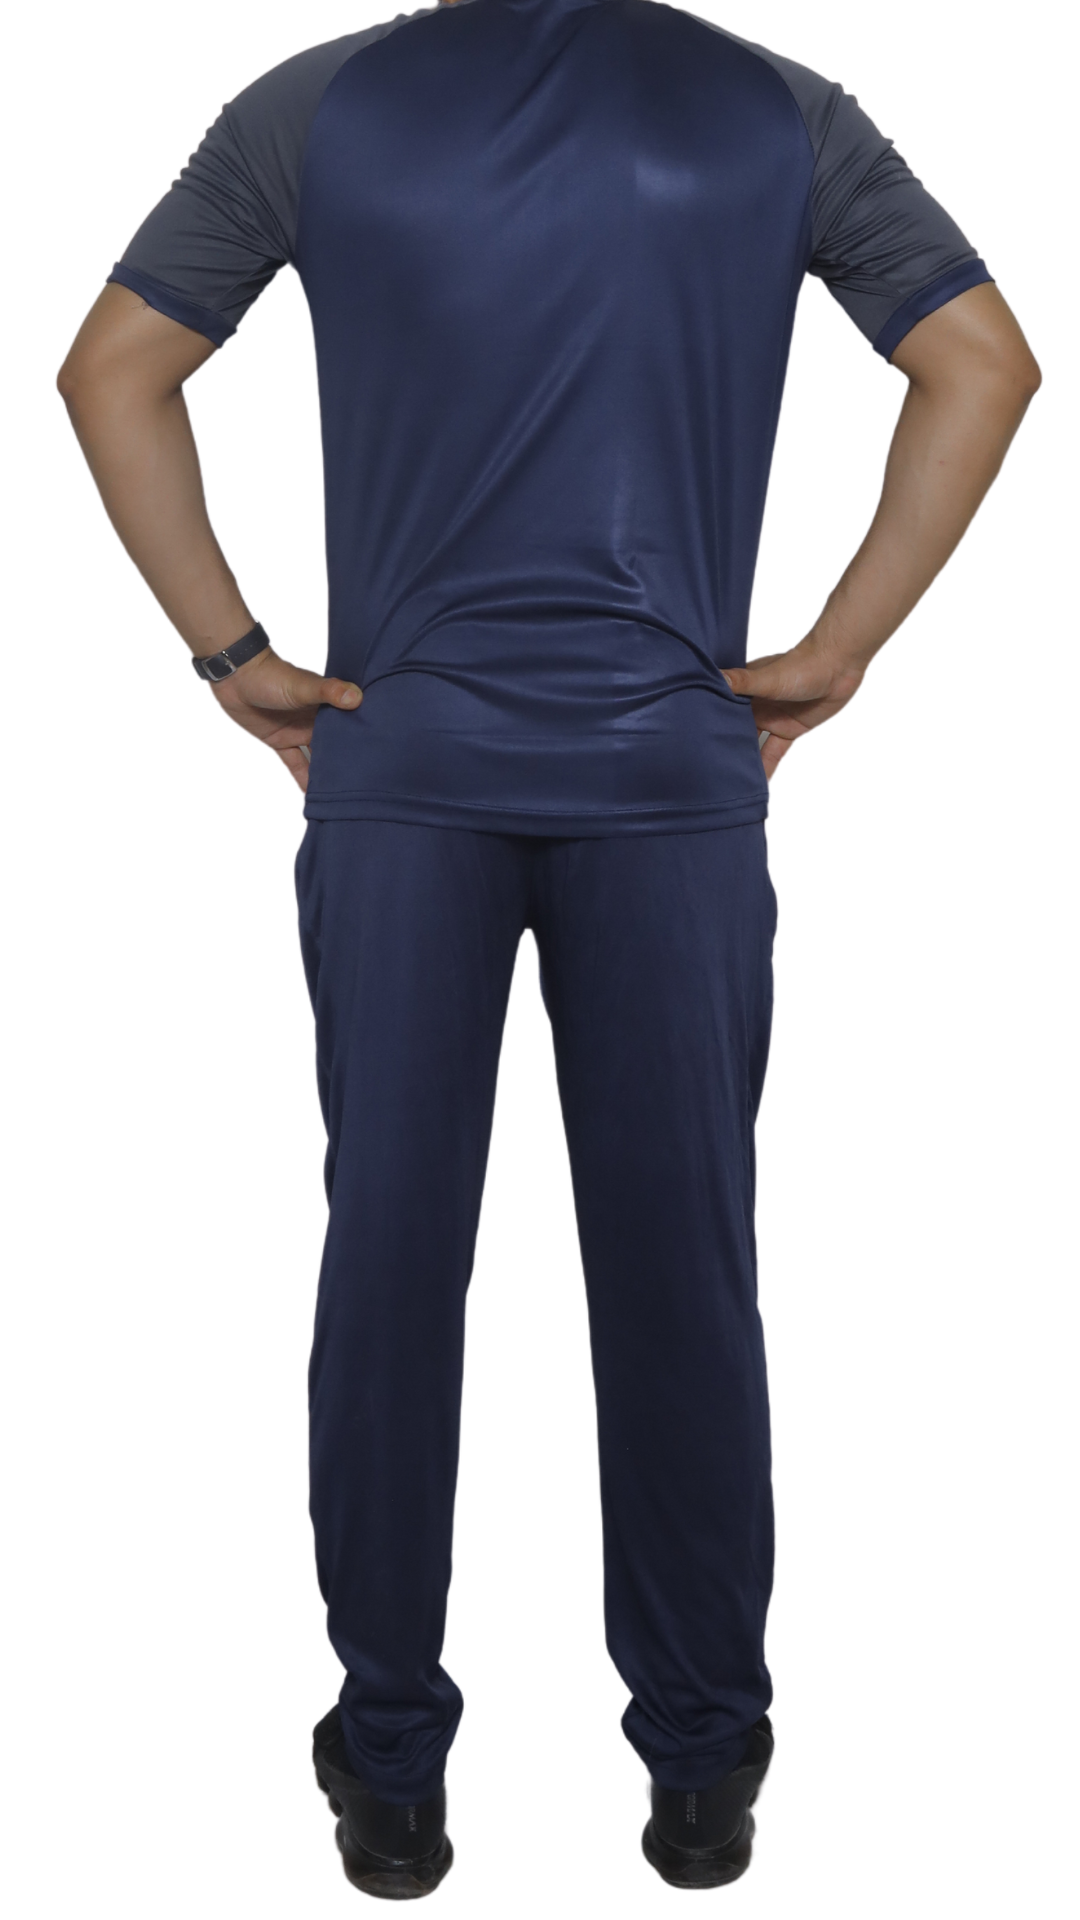 Navy Blue Based and Grey Sleeved Summer's Track Suit